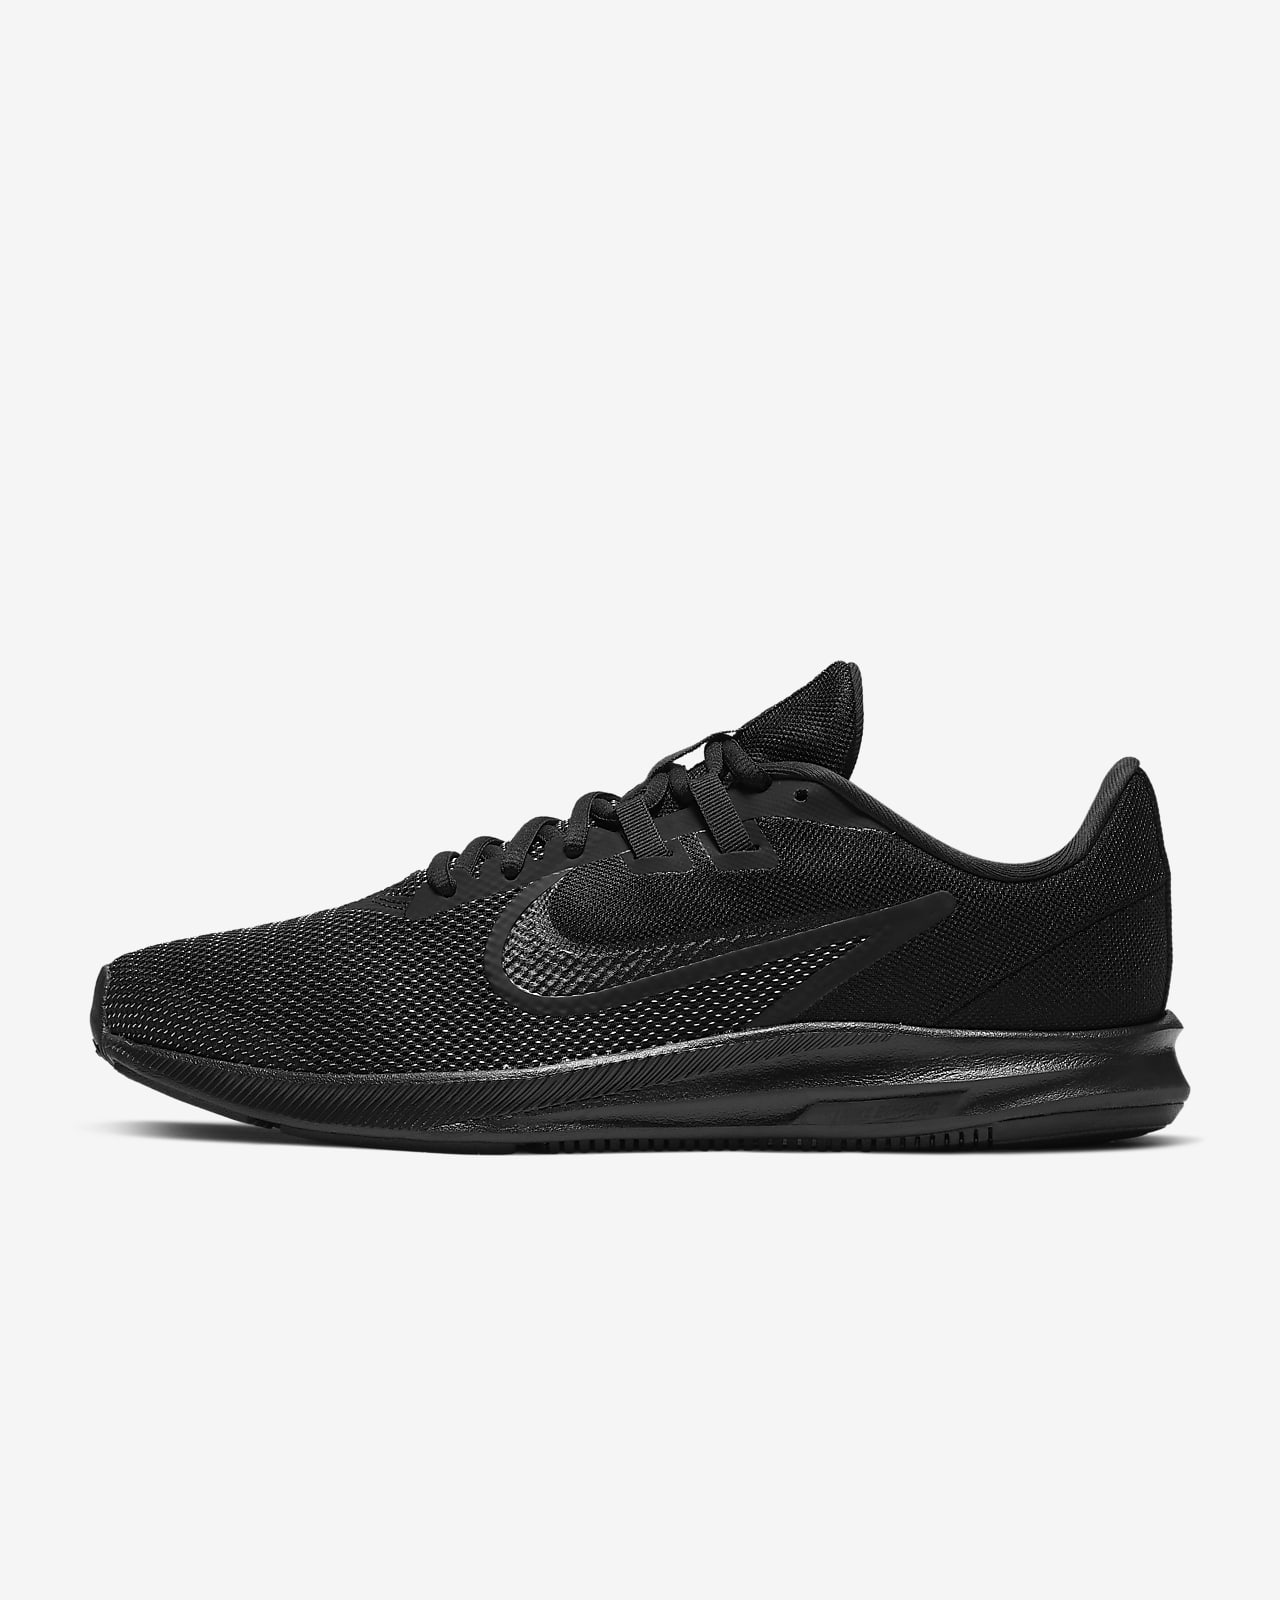 Chaussure de running Nike Downshifter 9 pour Homme